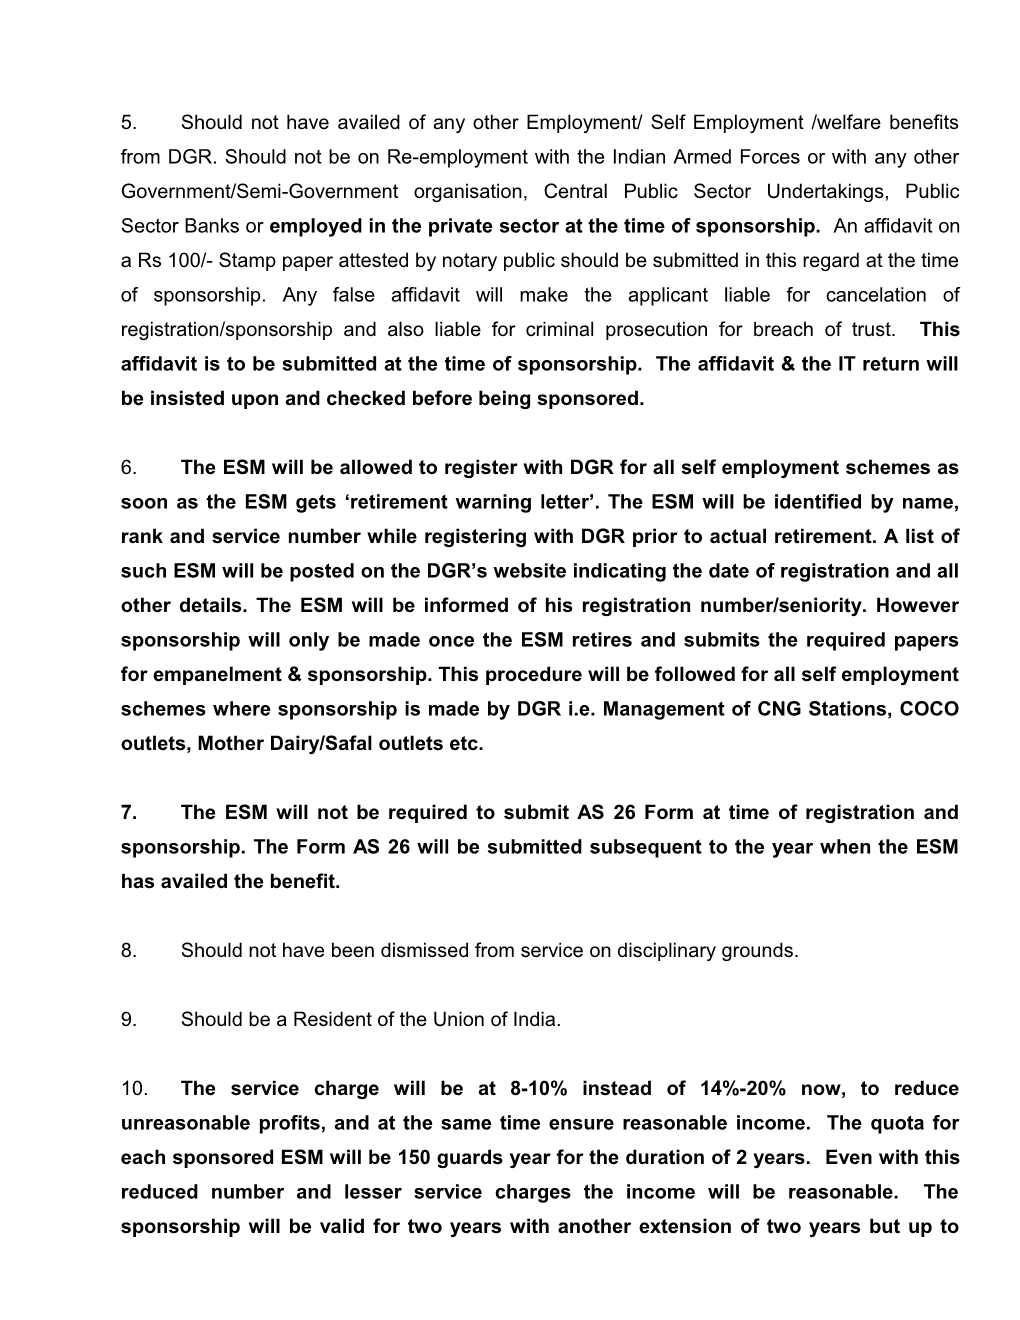 Draft Guidelines for Functioning of Dgr Empanelled Exservicemen for Security Services